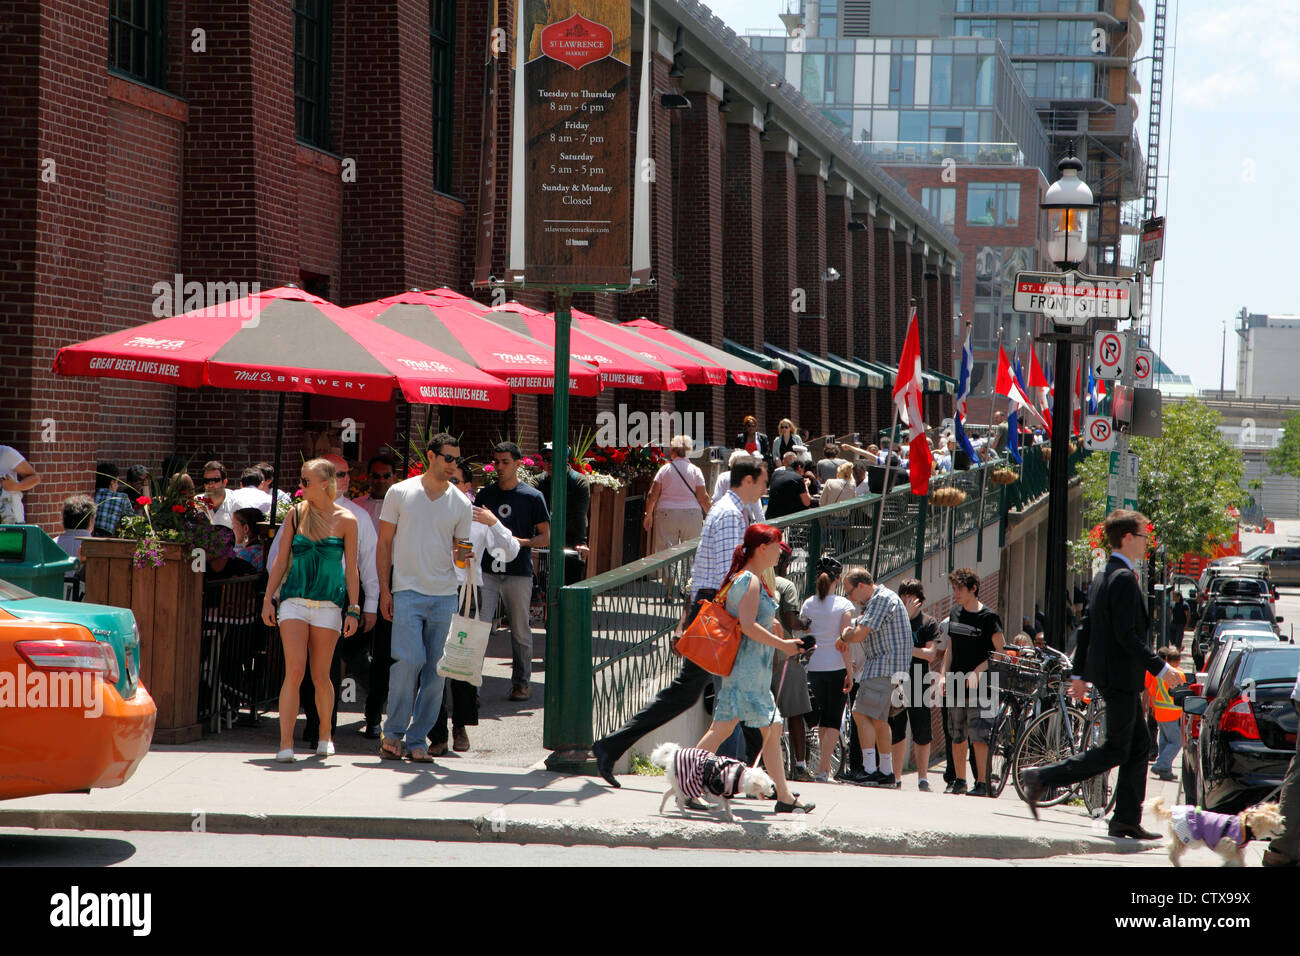 Lunch Time Diners On The Outdoor Patio At The St Lawrence Food Market In Toronto, Ontario, Kanada, 26. Juni 2012 Stockfoto